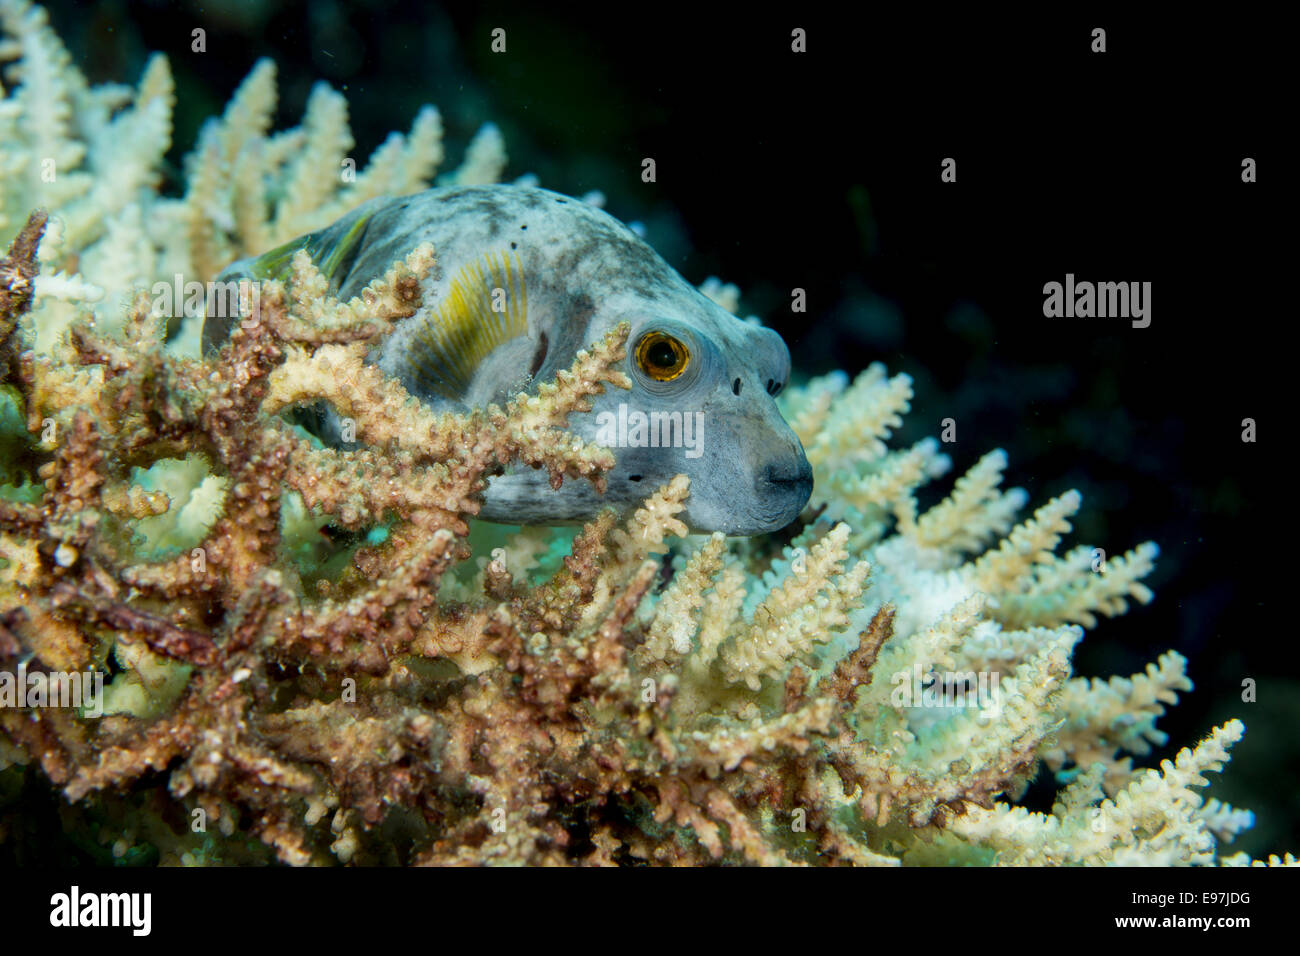 Close-up of a Blue-spotted pufferfish nestled amid a stony coral in the Acropora family. Stock Photo